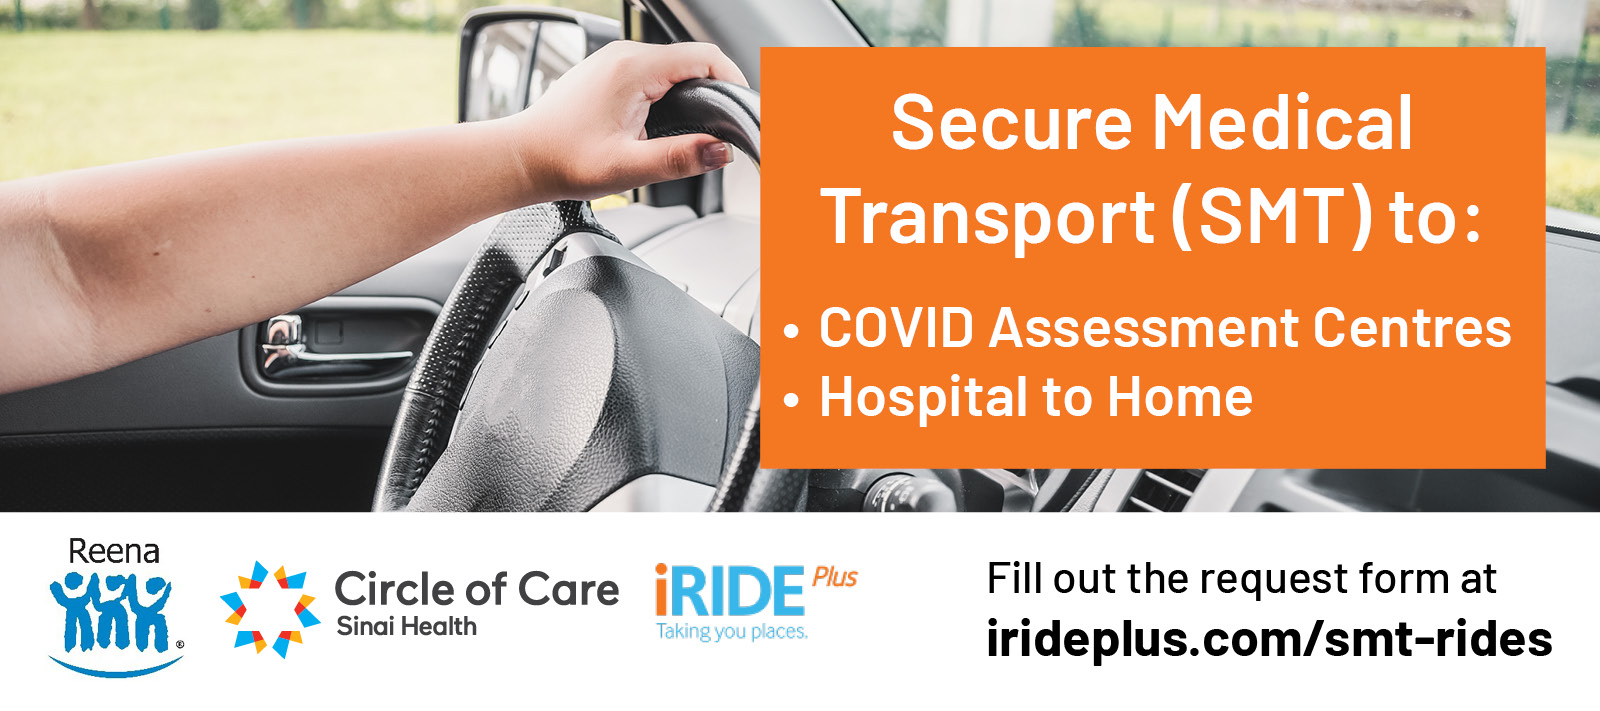 Secure Medical Transport (SMT) to COVID Assessment Centres and Hospital to Home